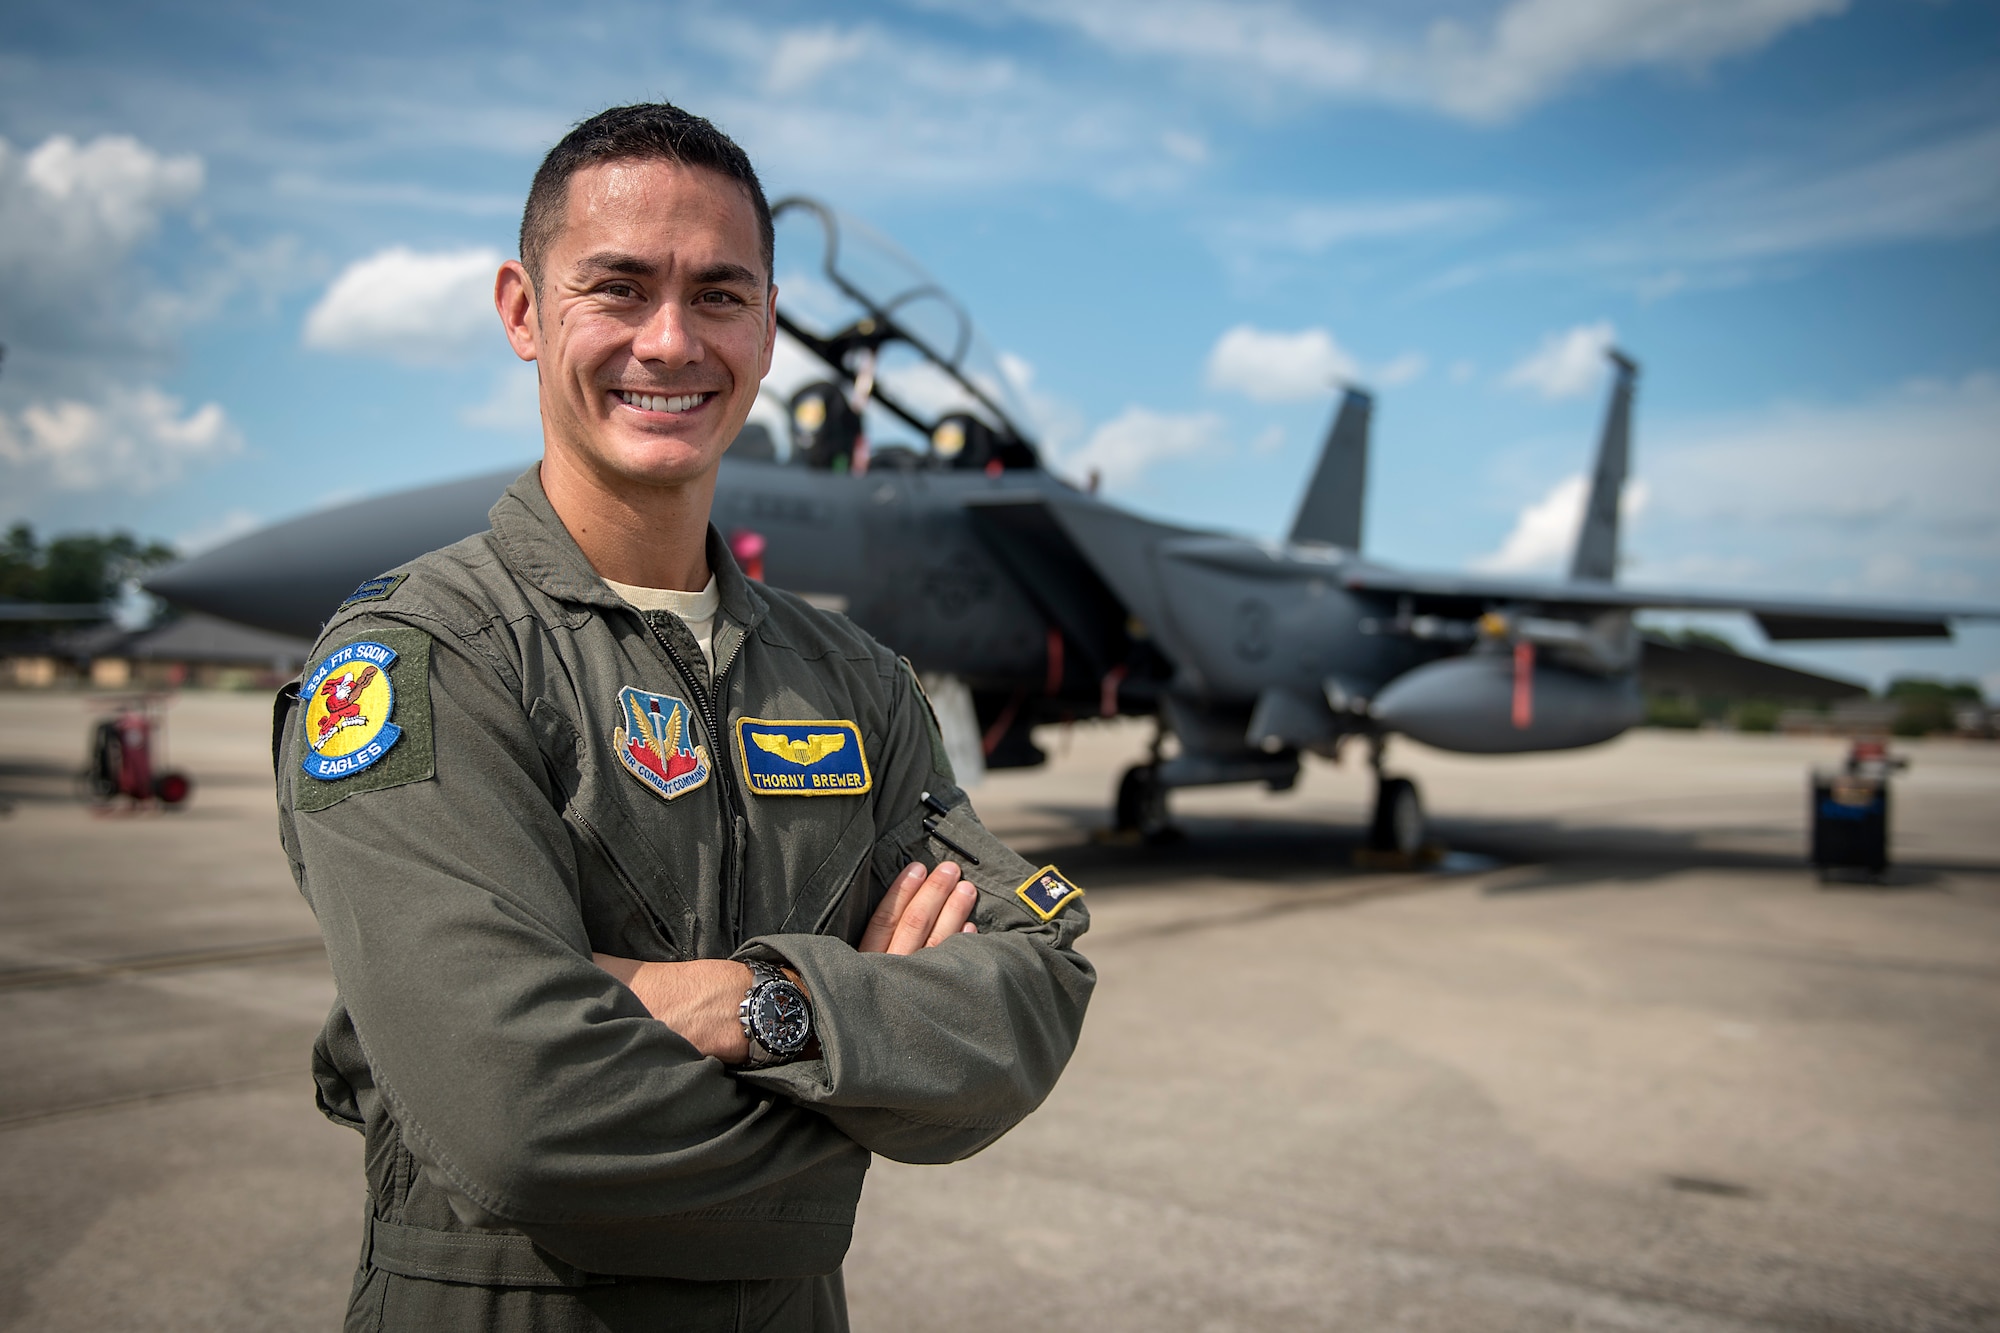 334th Eagle selected for Air Force's premier demo team